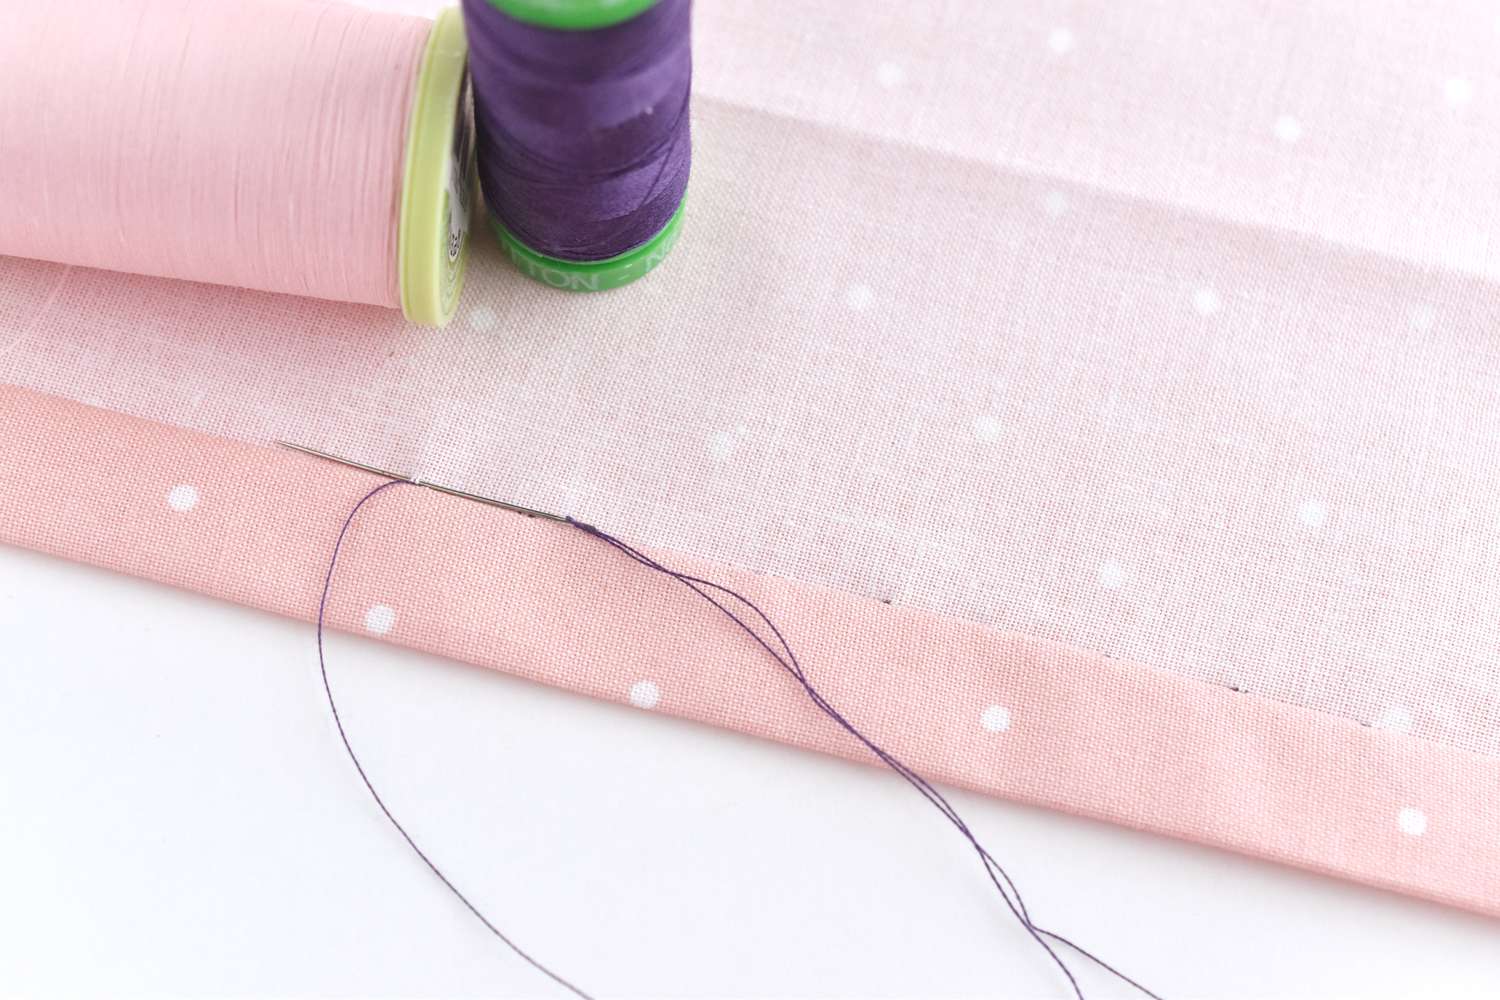 How to Blind Stitch Hems and Openings